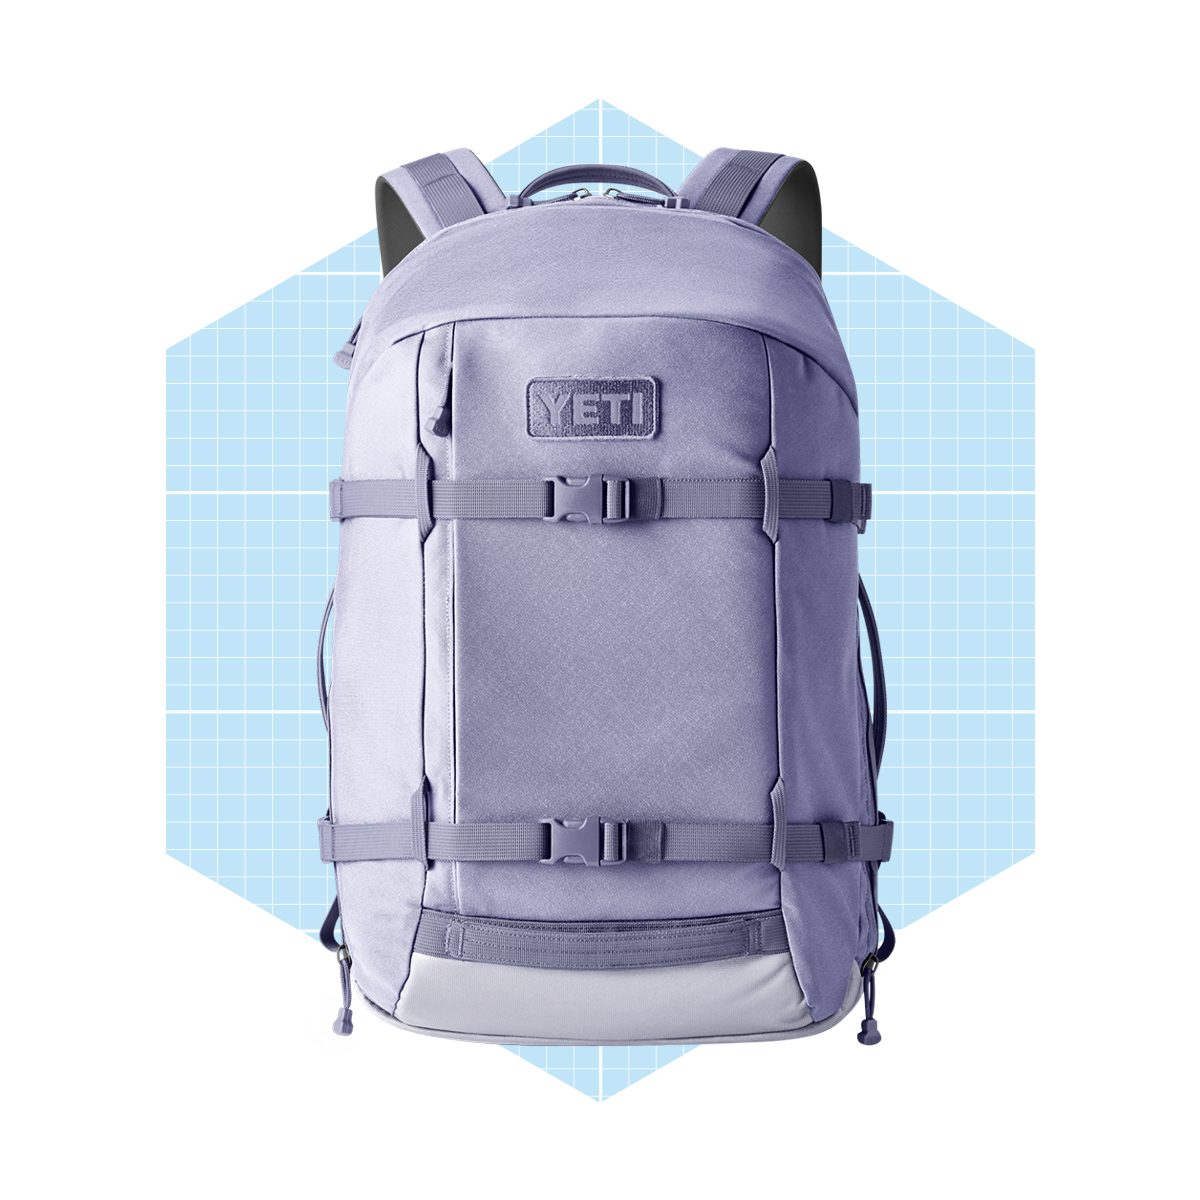 YETI Just Introduced Two New Limited Edition Colors: Cosmic Lilac And Camp  Green - BroBible